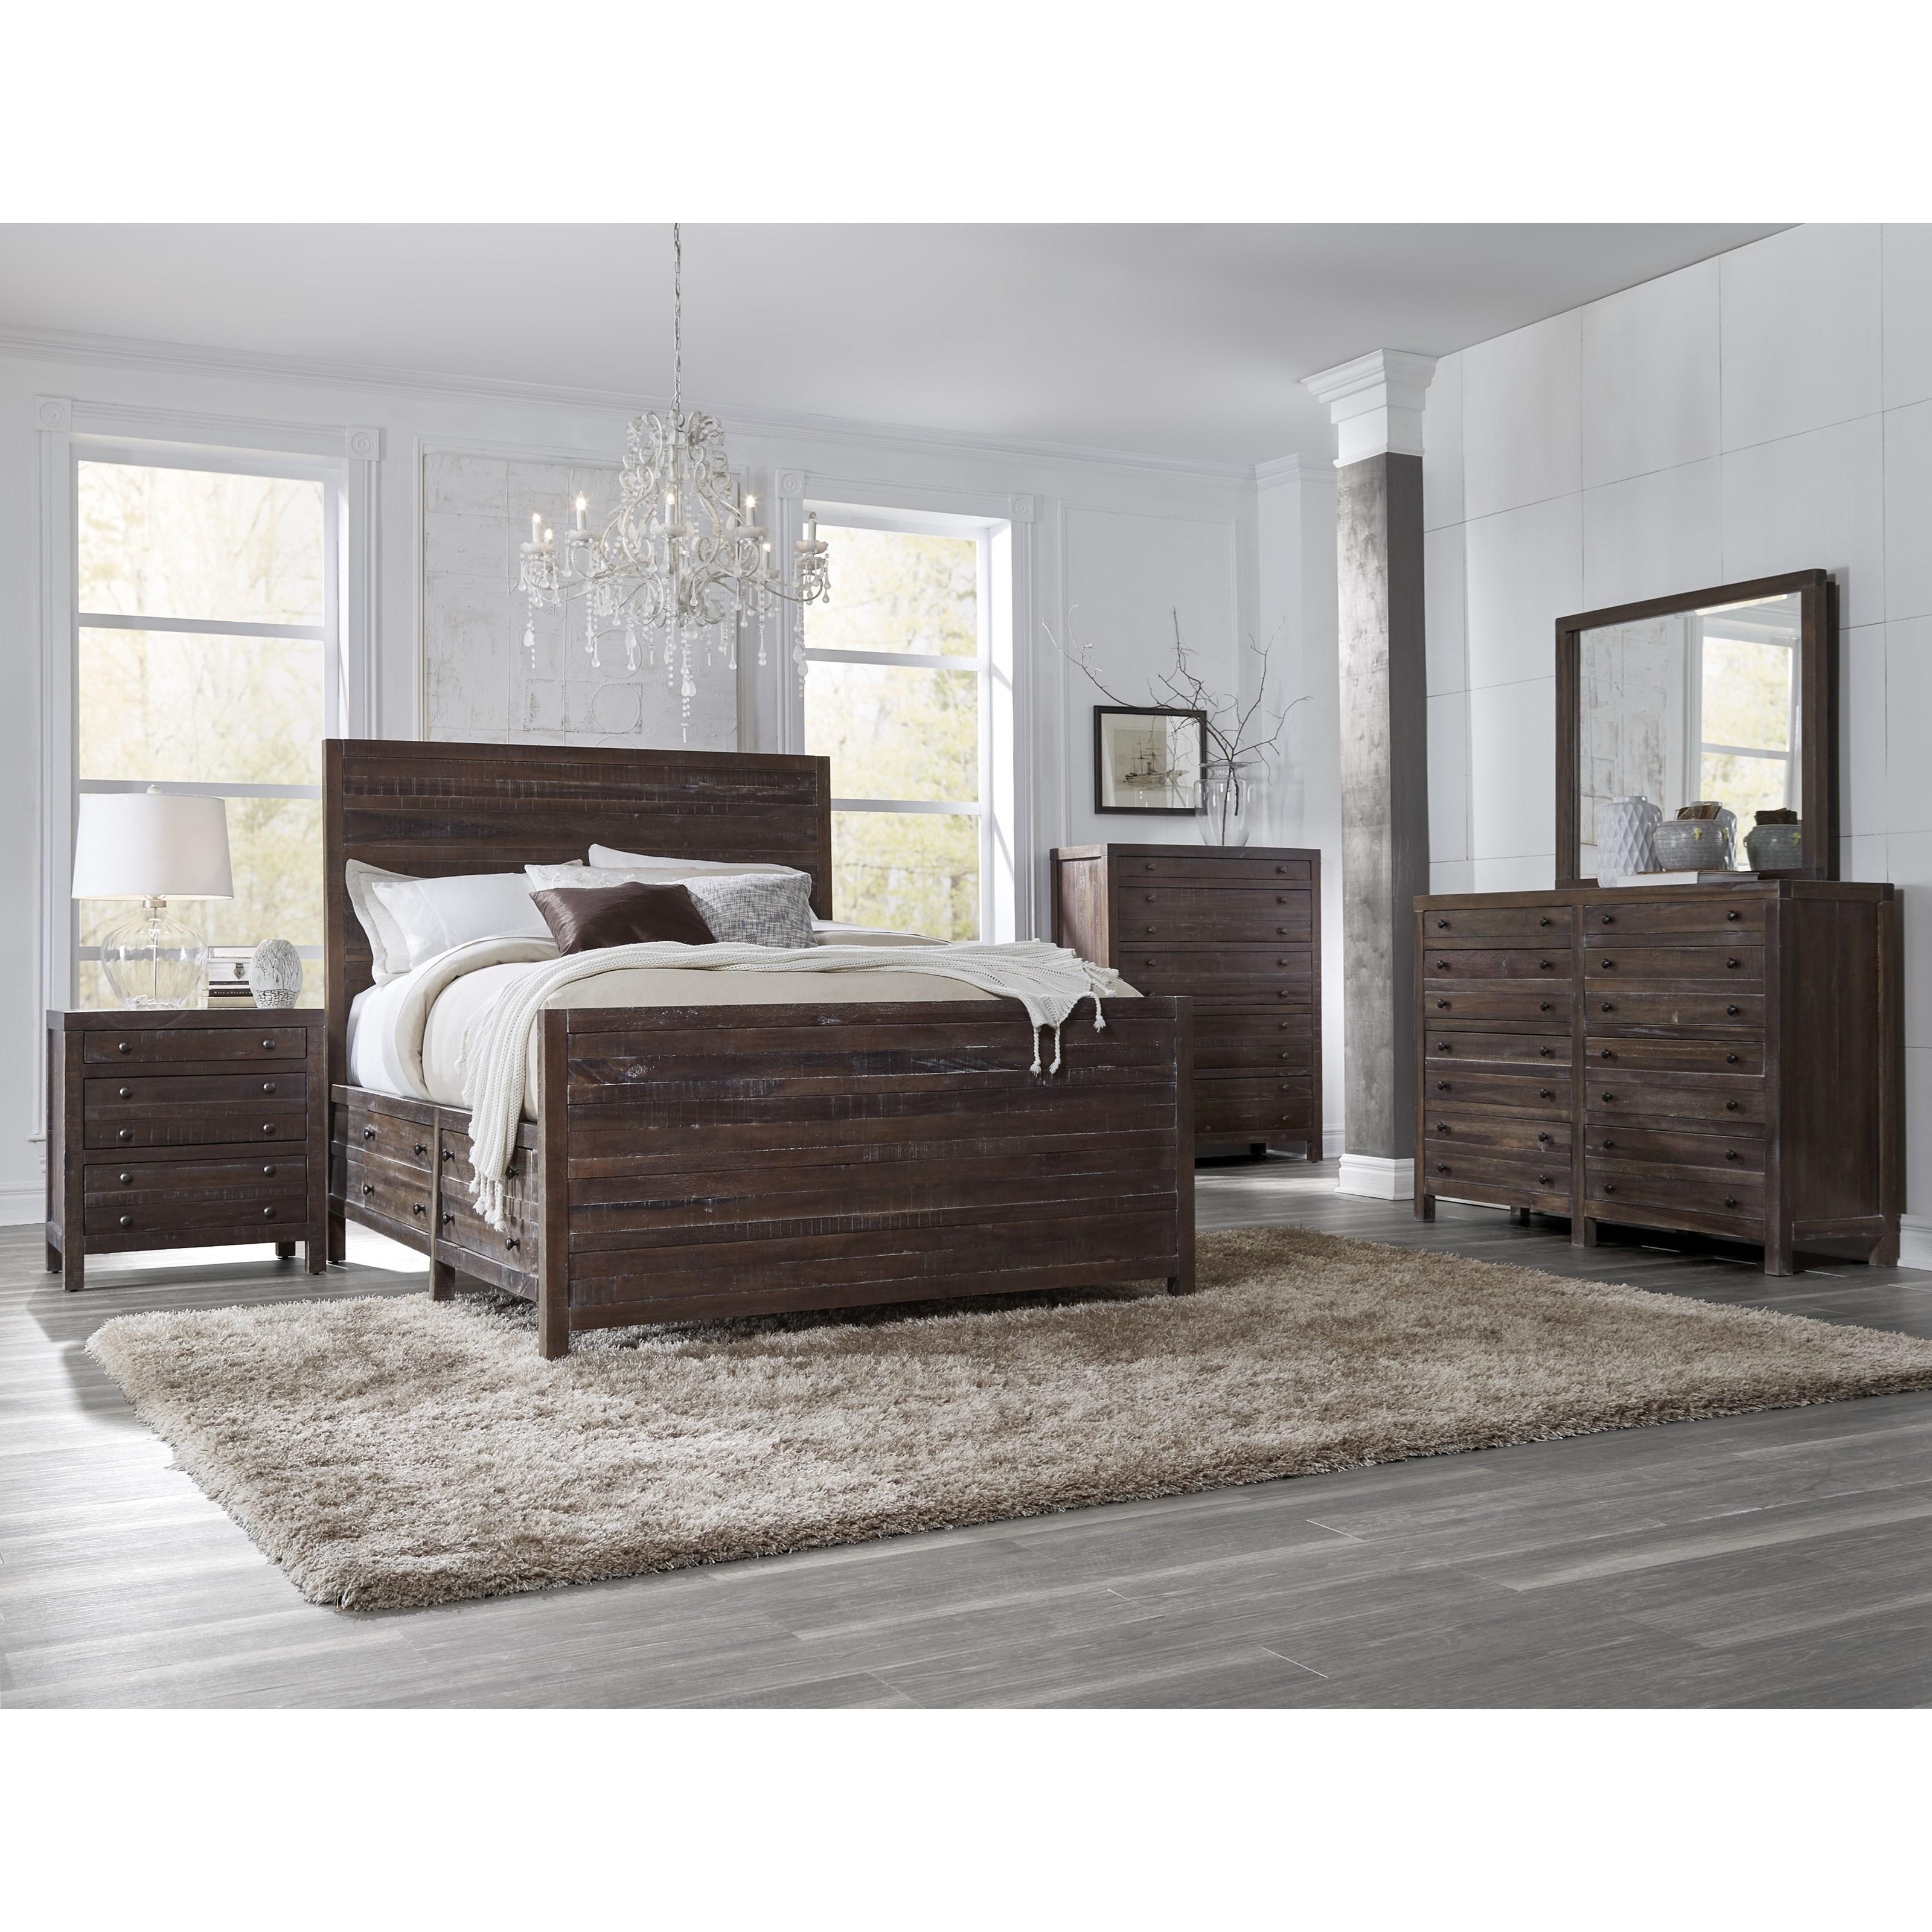 Contemporary, Rustic Storage Bedroom Set TOWNSEND 8T06D5-NDMC-5PC in Java 